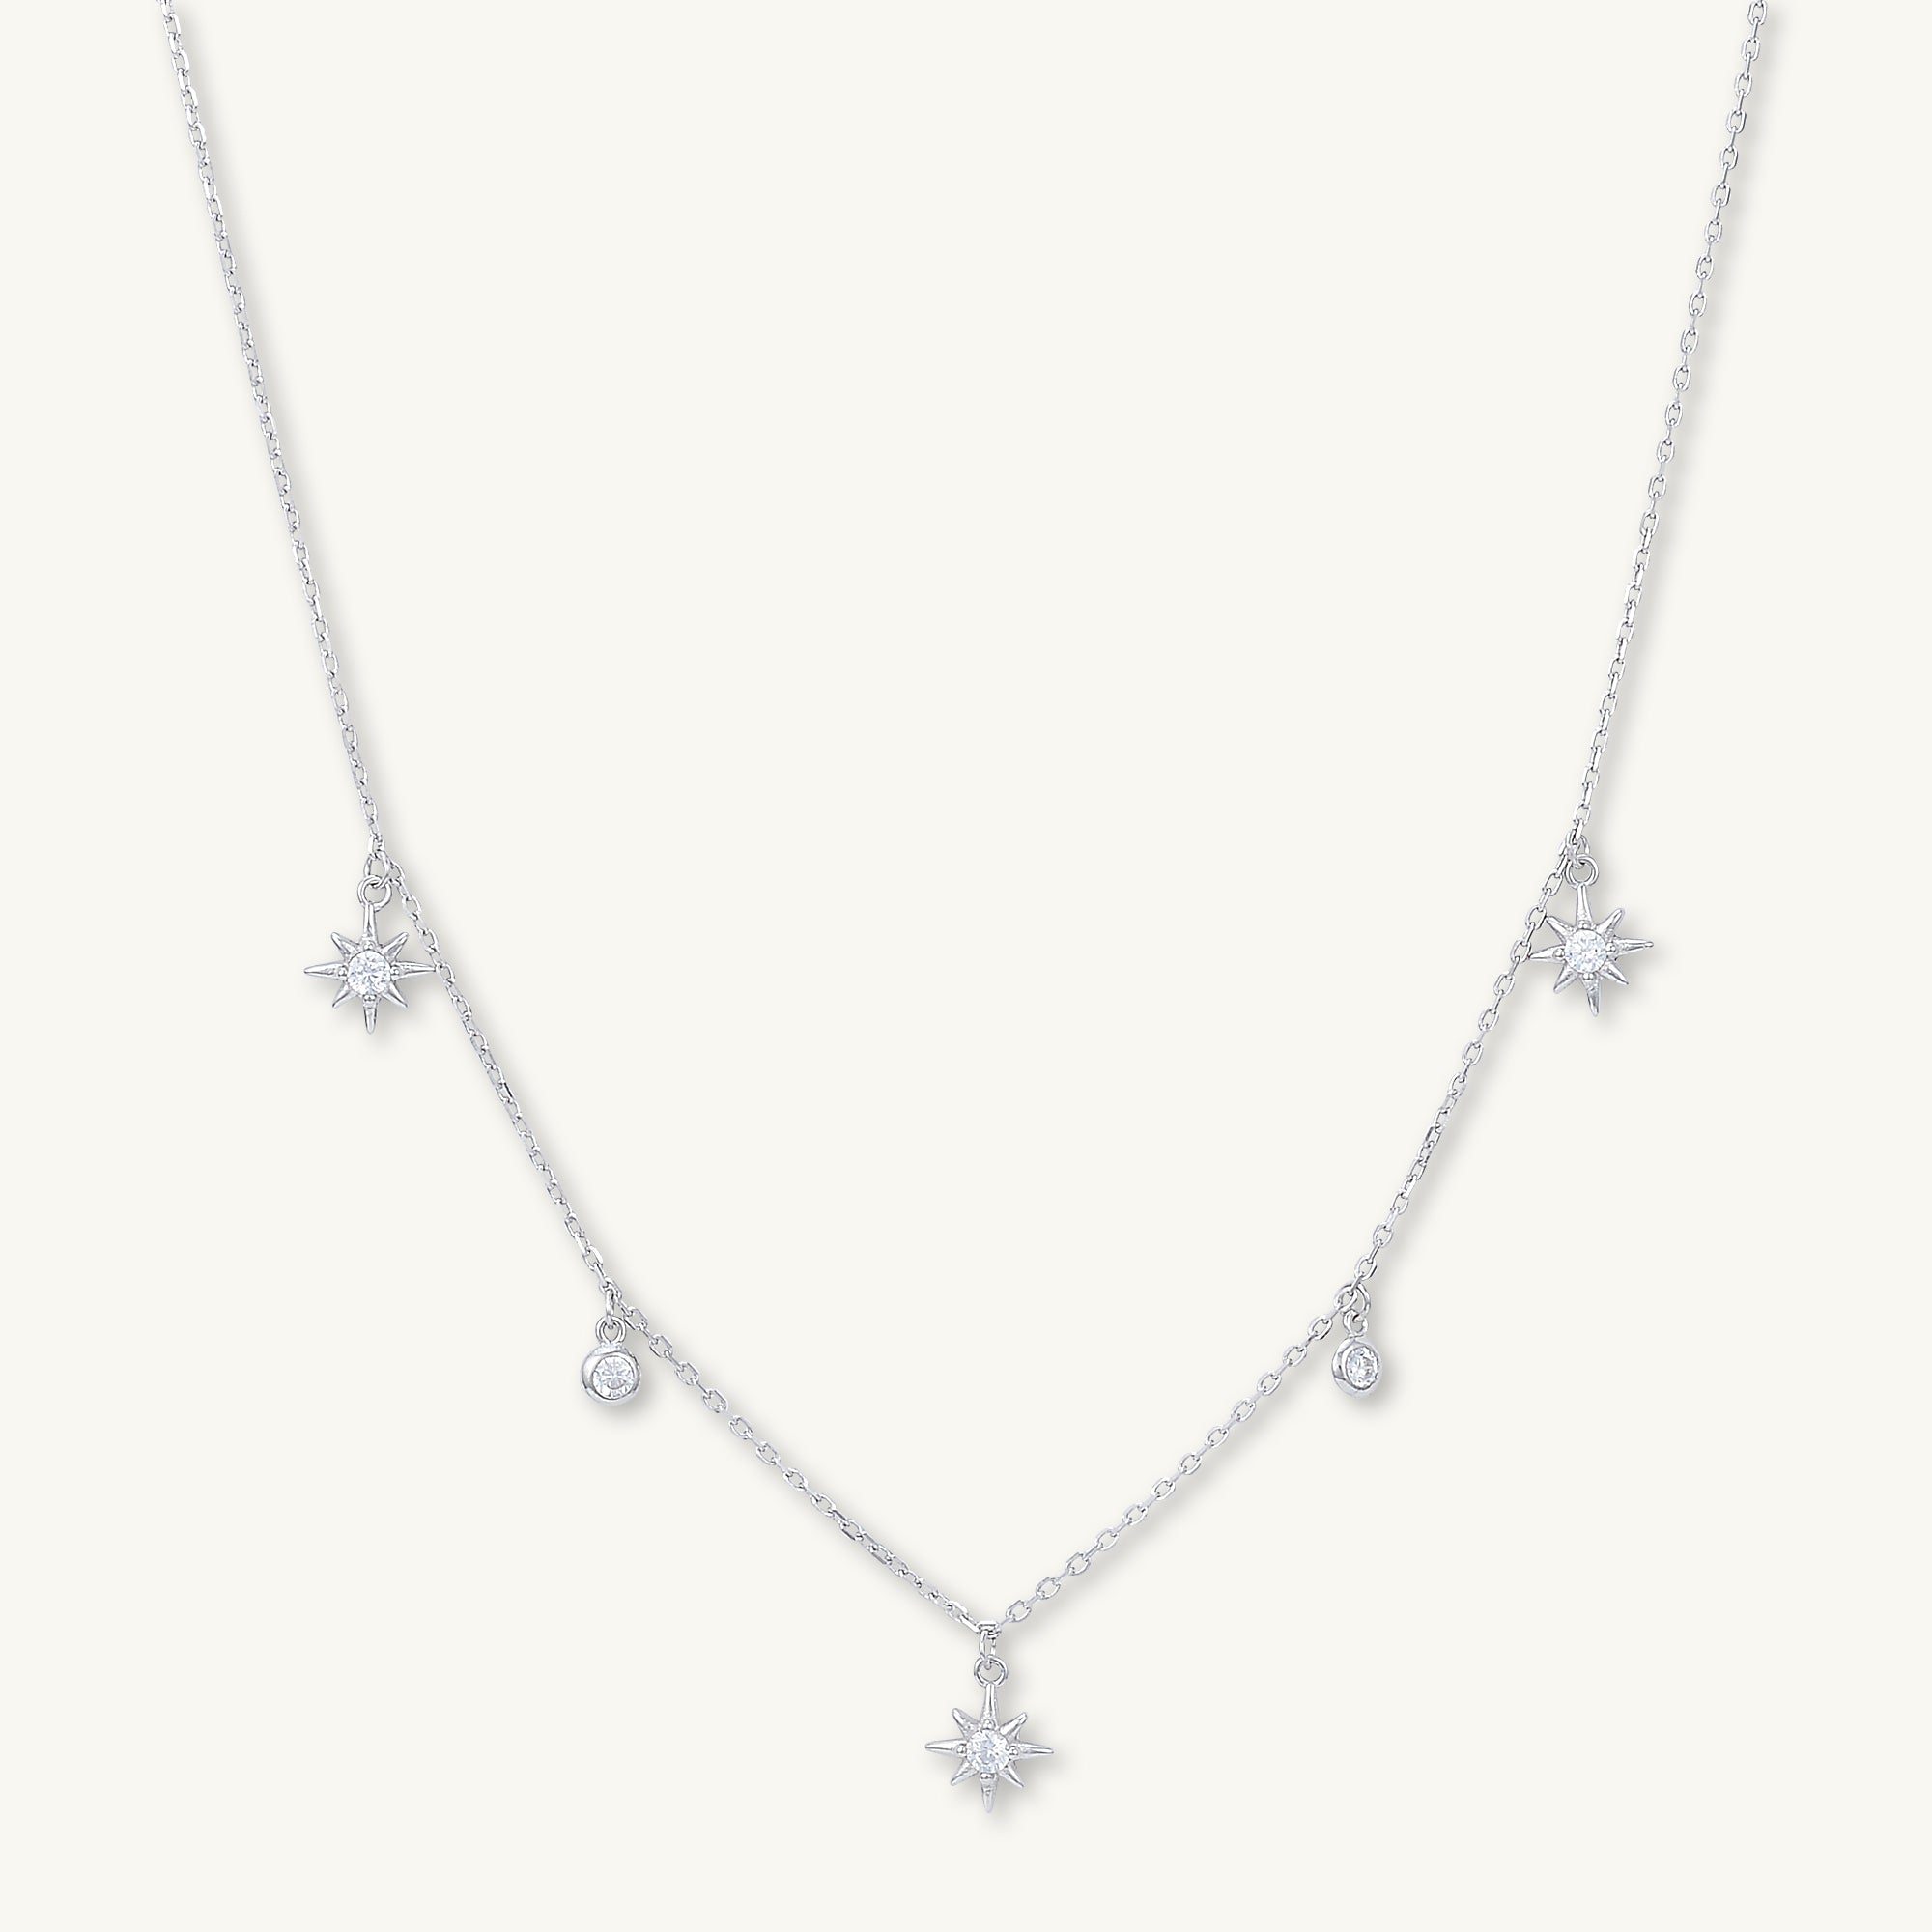 North Star Dangling Sapphire Necklace